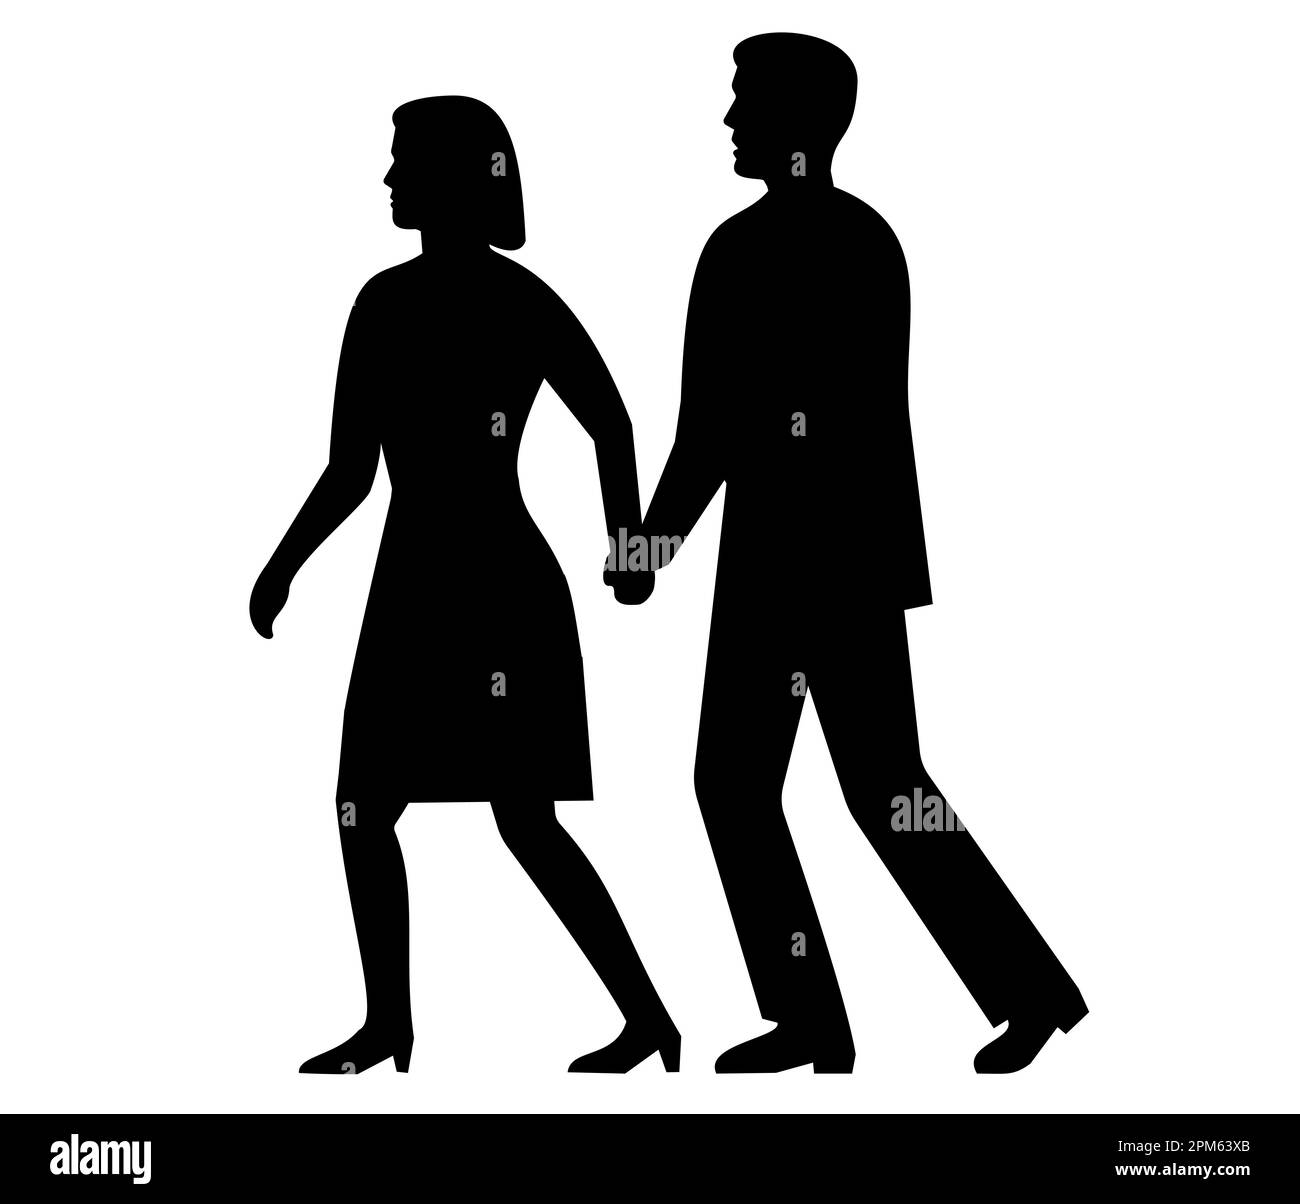 Retro style illustration of a silhouette of a couple male and female walking away holding hands viewed from side on isolated background done in black Stock Photo